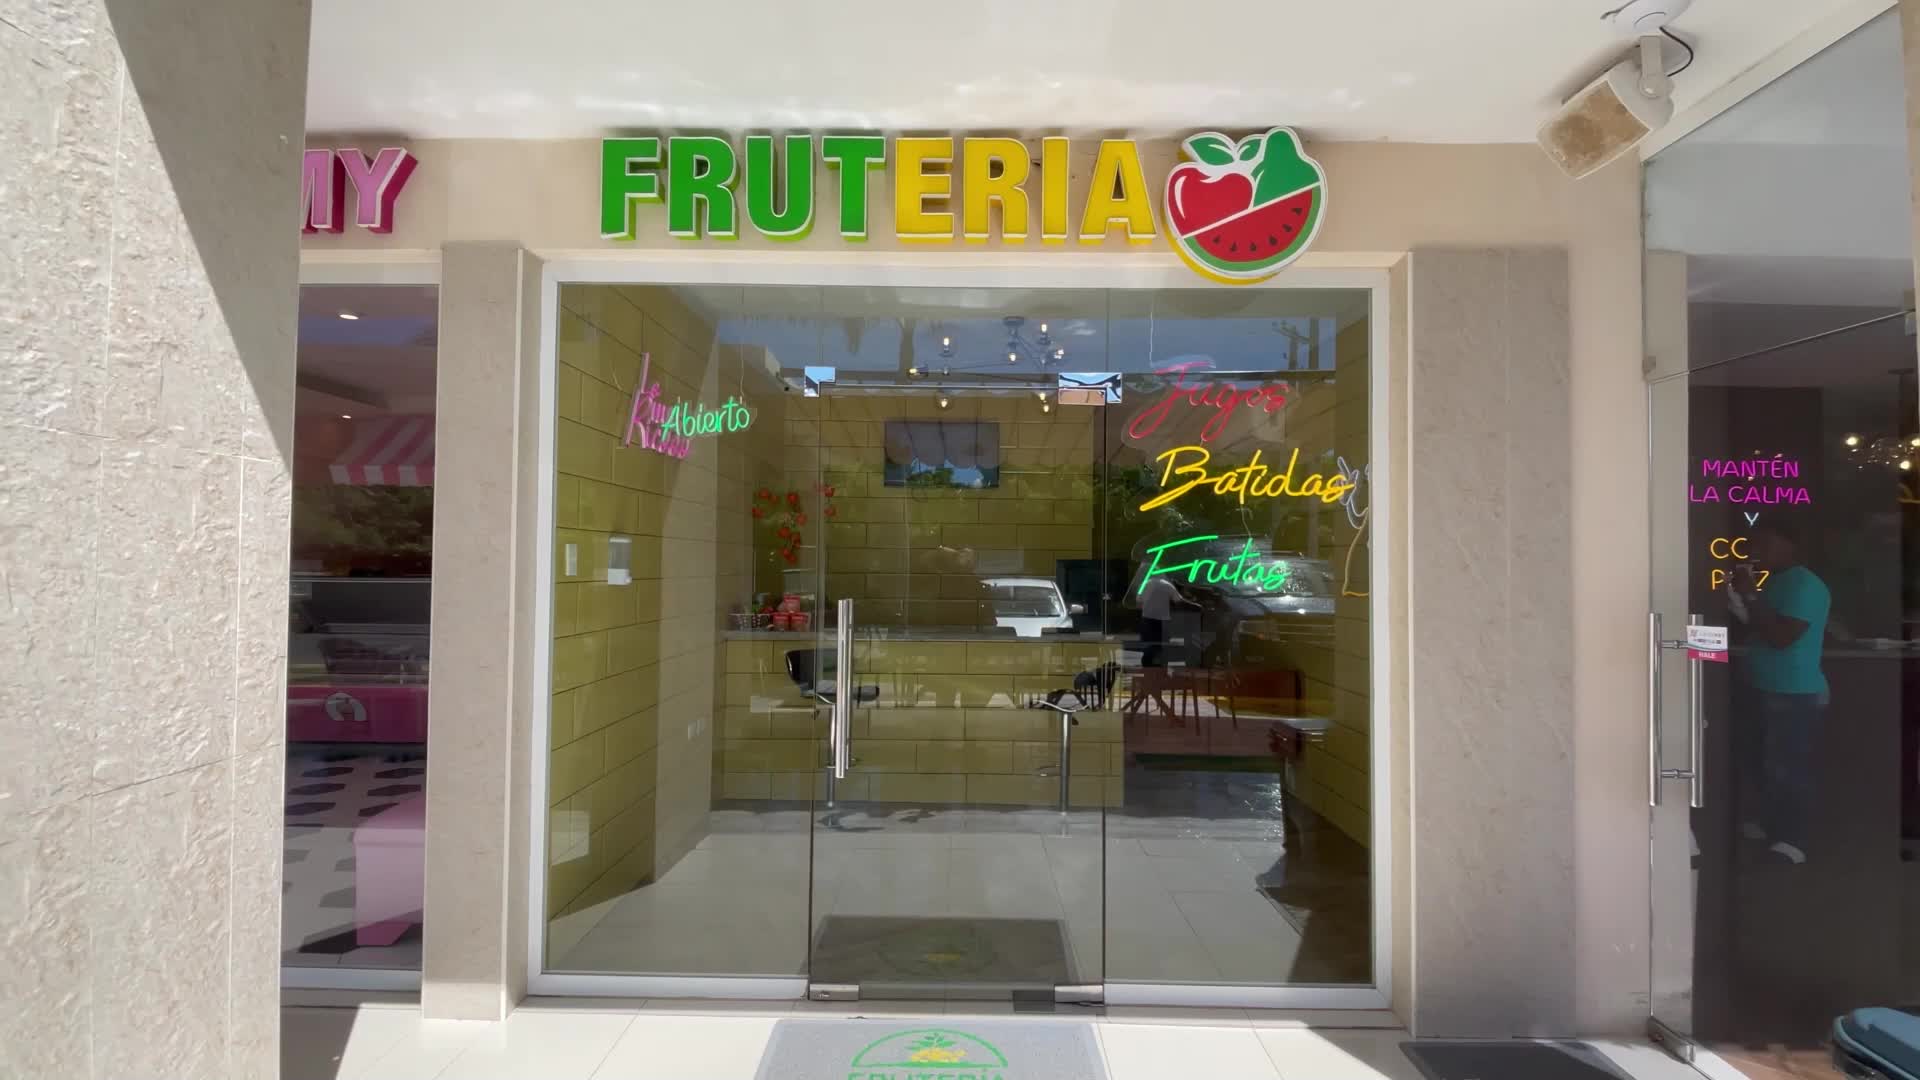 A promotional video showing the Fruteria at Playa Palmera Beach Resort, guests, staff and fruit.  